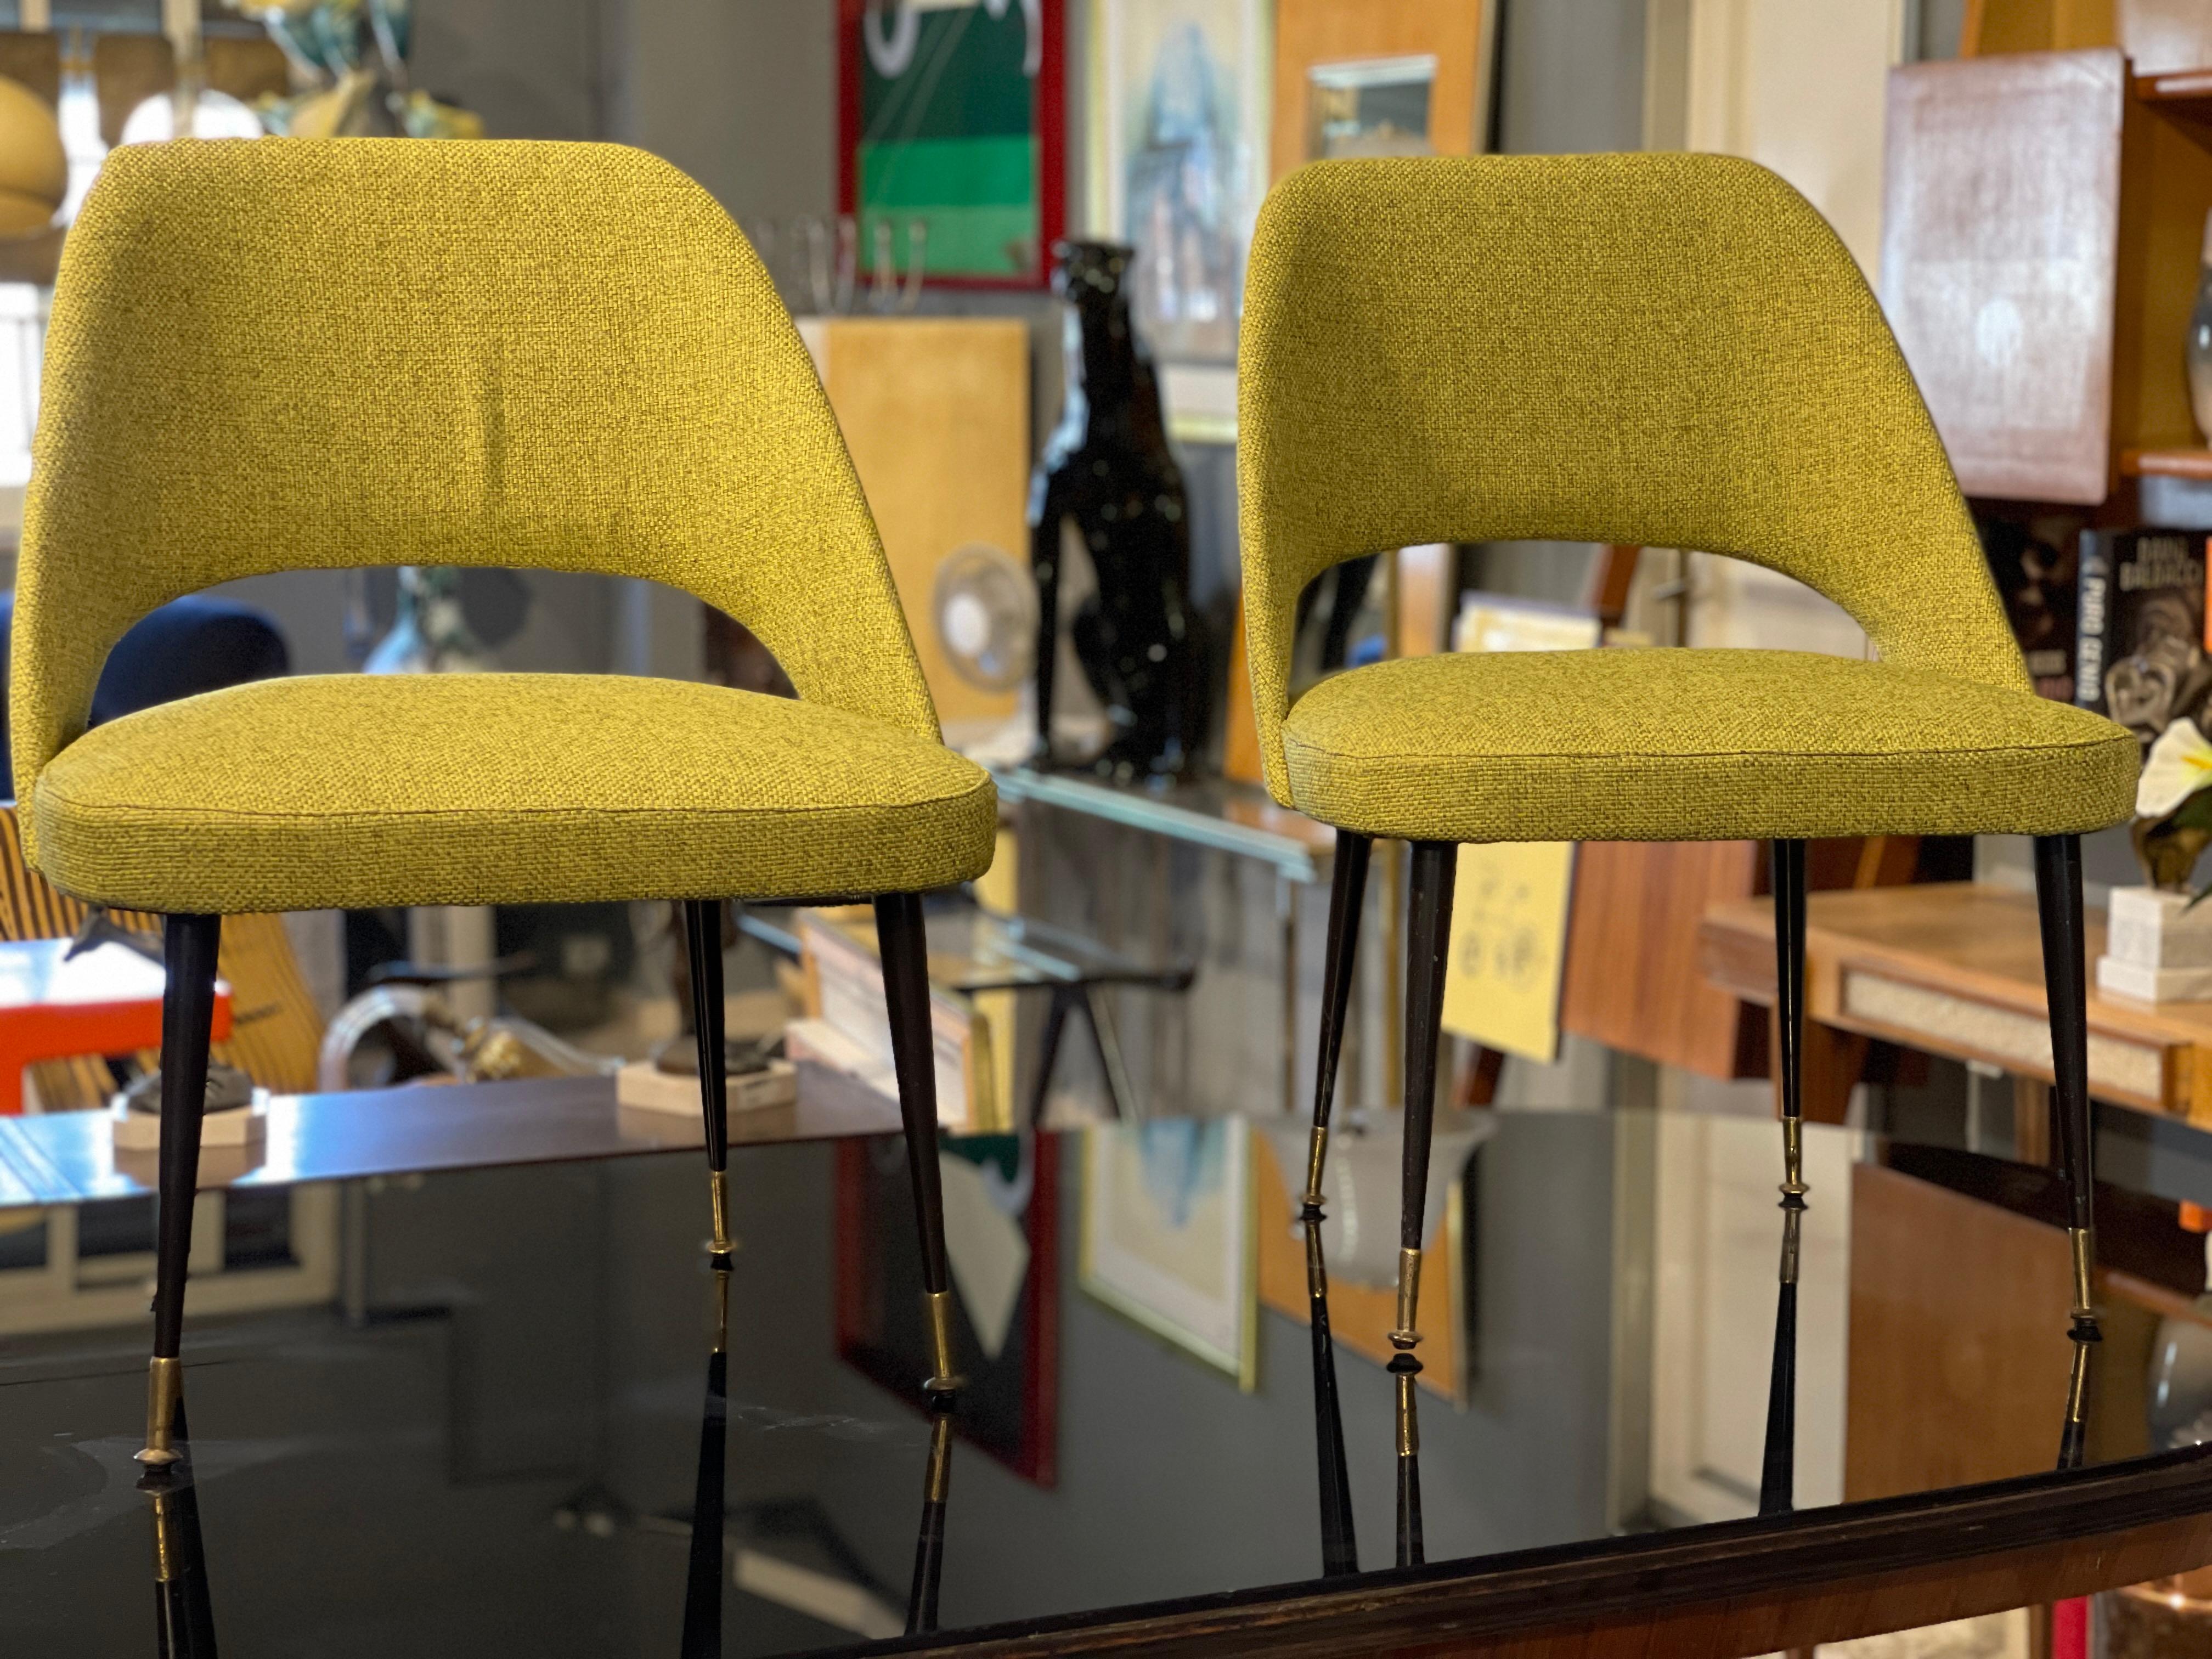 Pair of reworked armchairs, Italian production of the 1960s attributable to the design company RIMA.